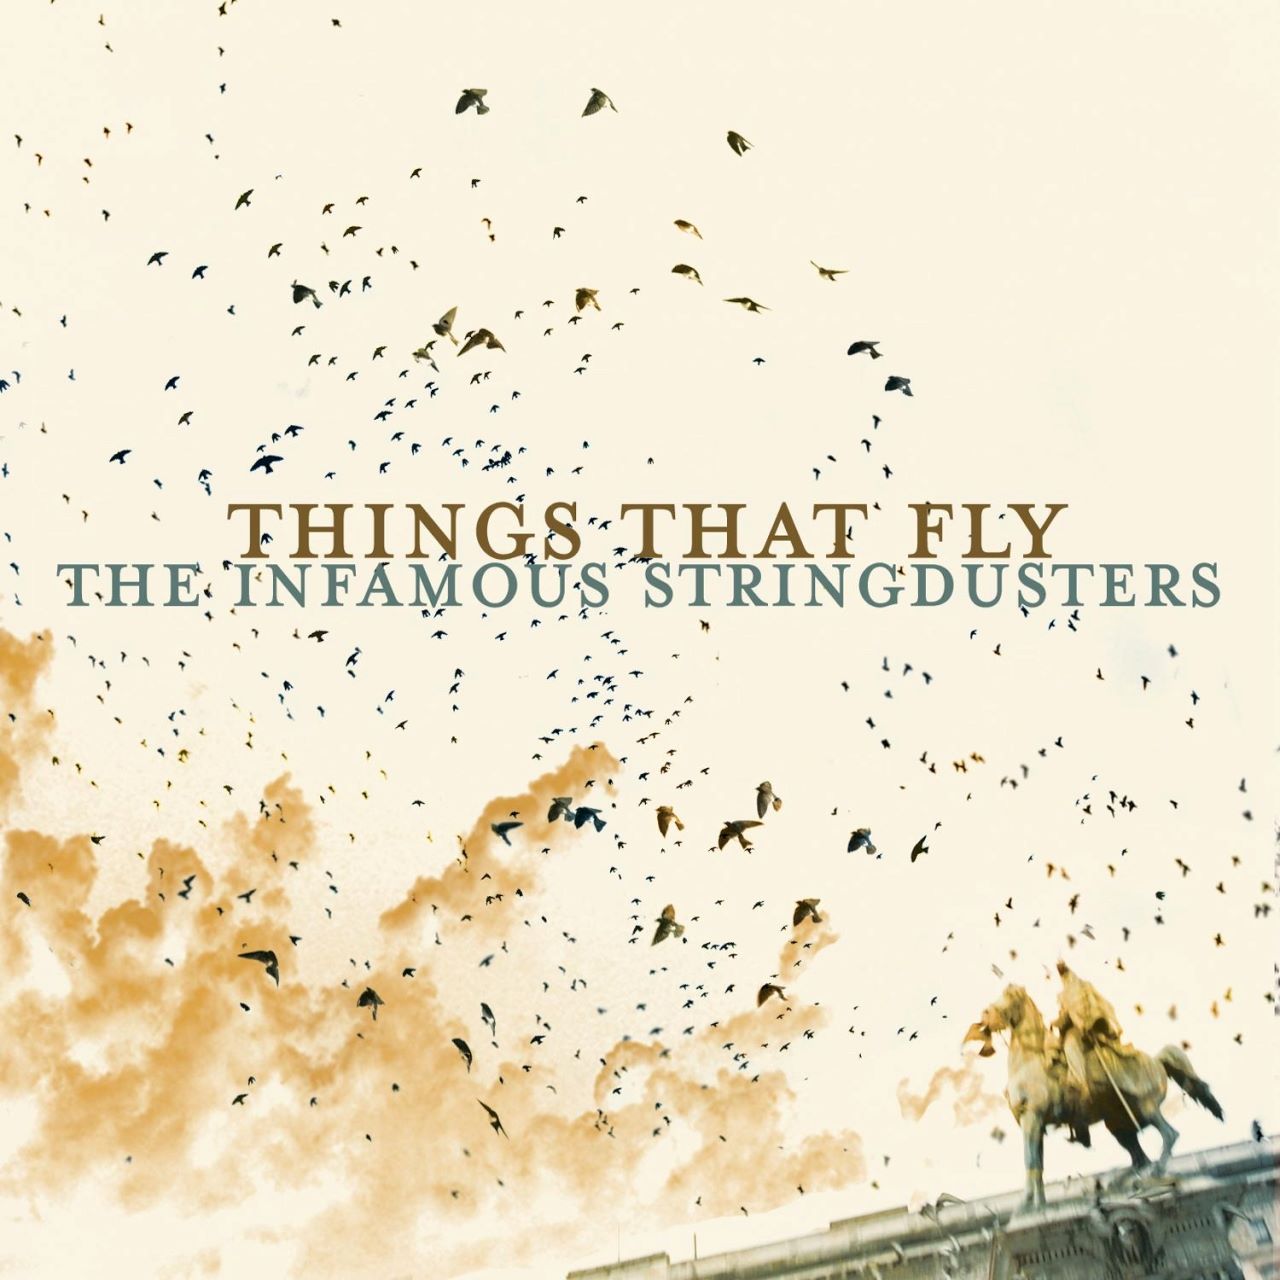 Infamous Stringdusters - Things That Fly cover album